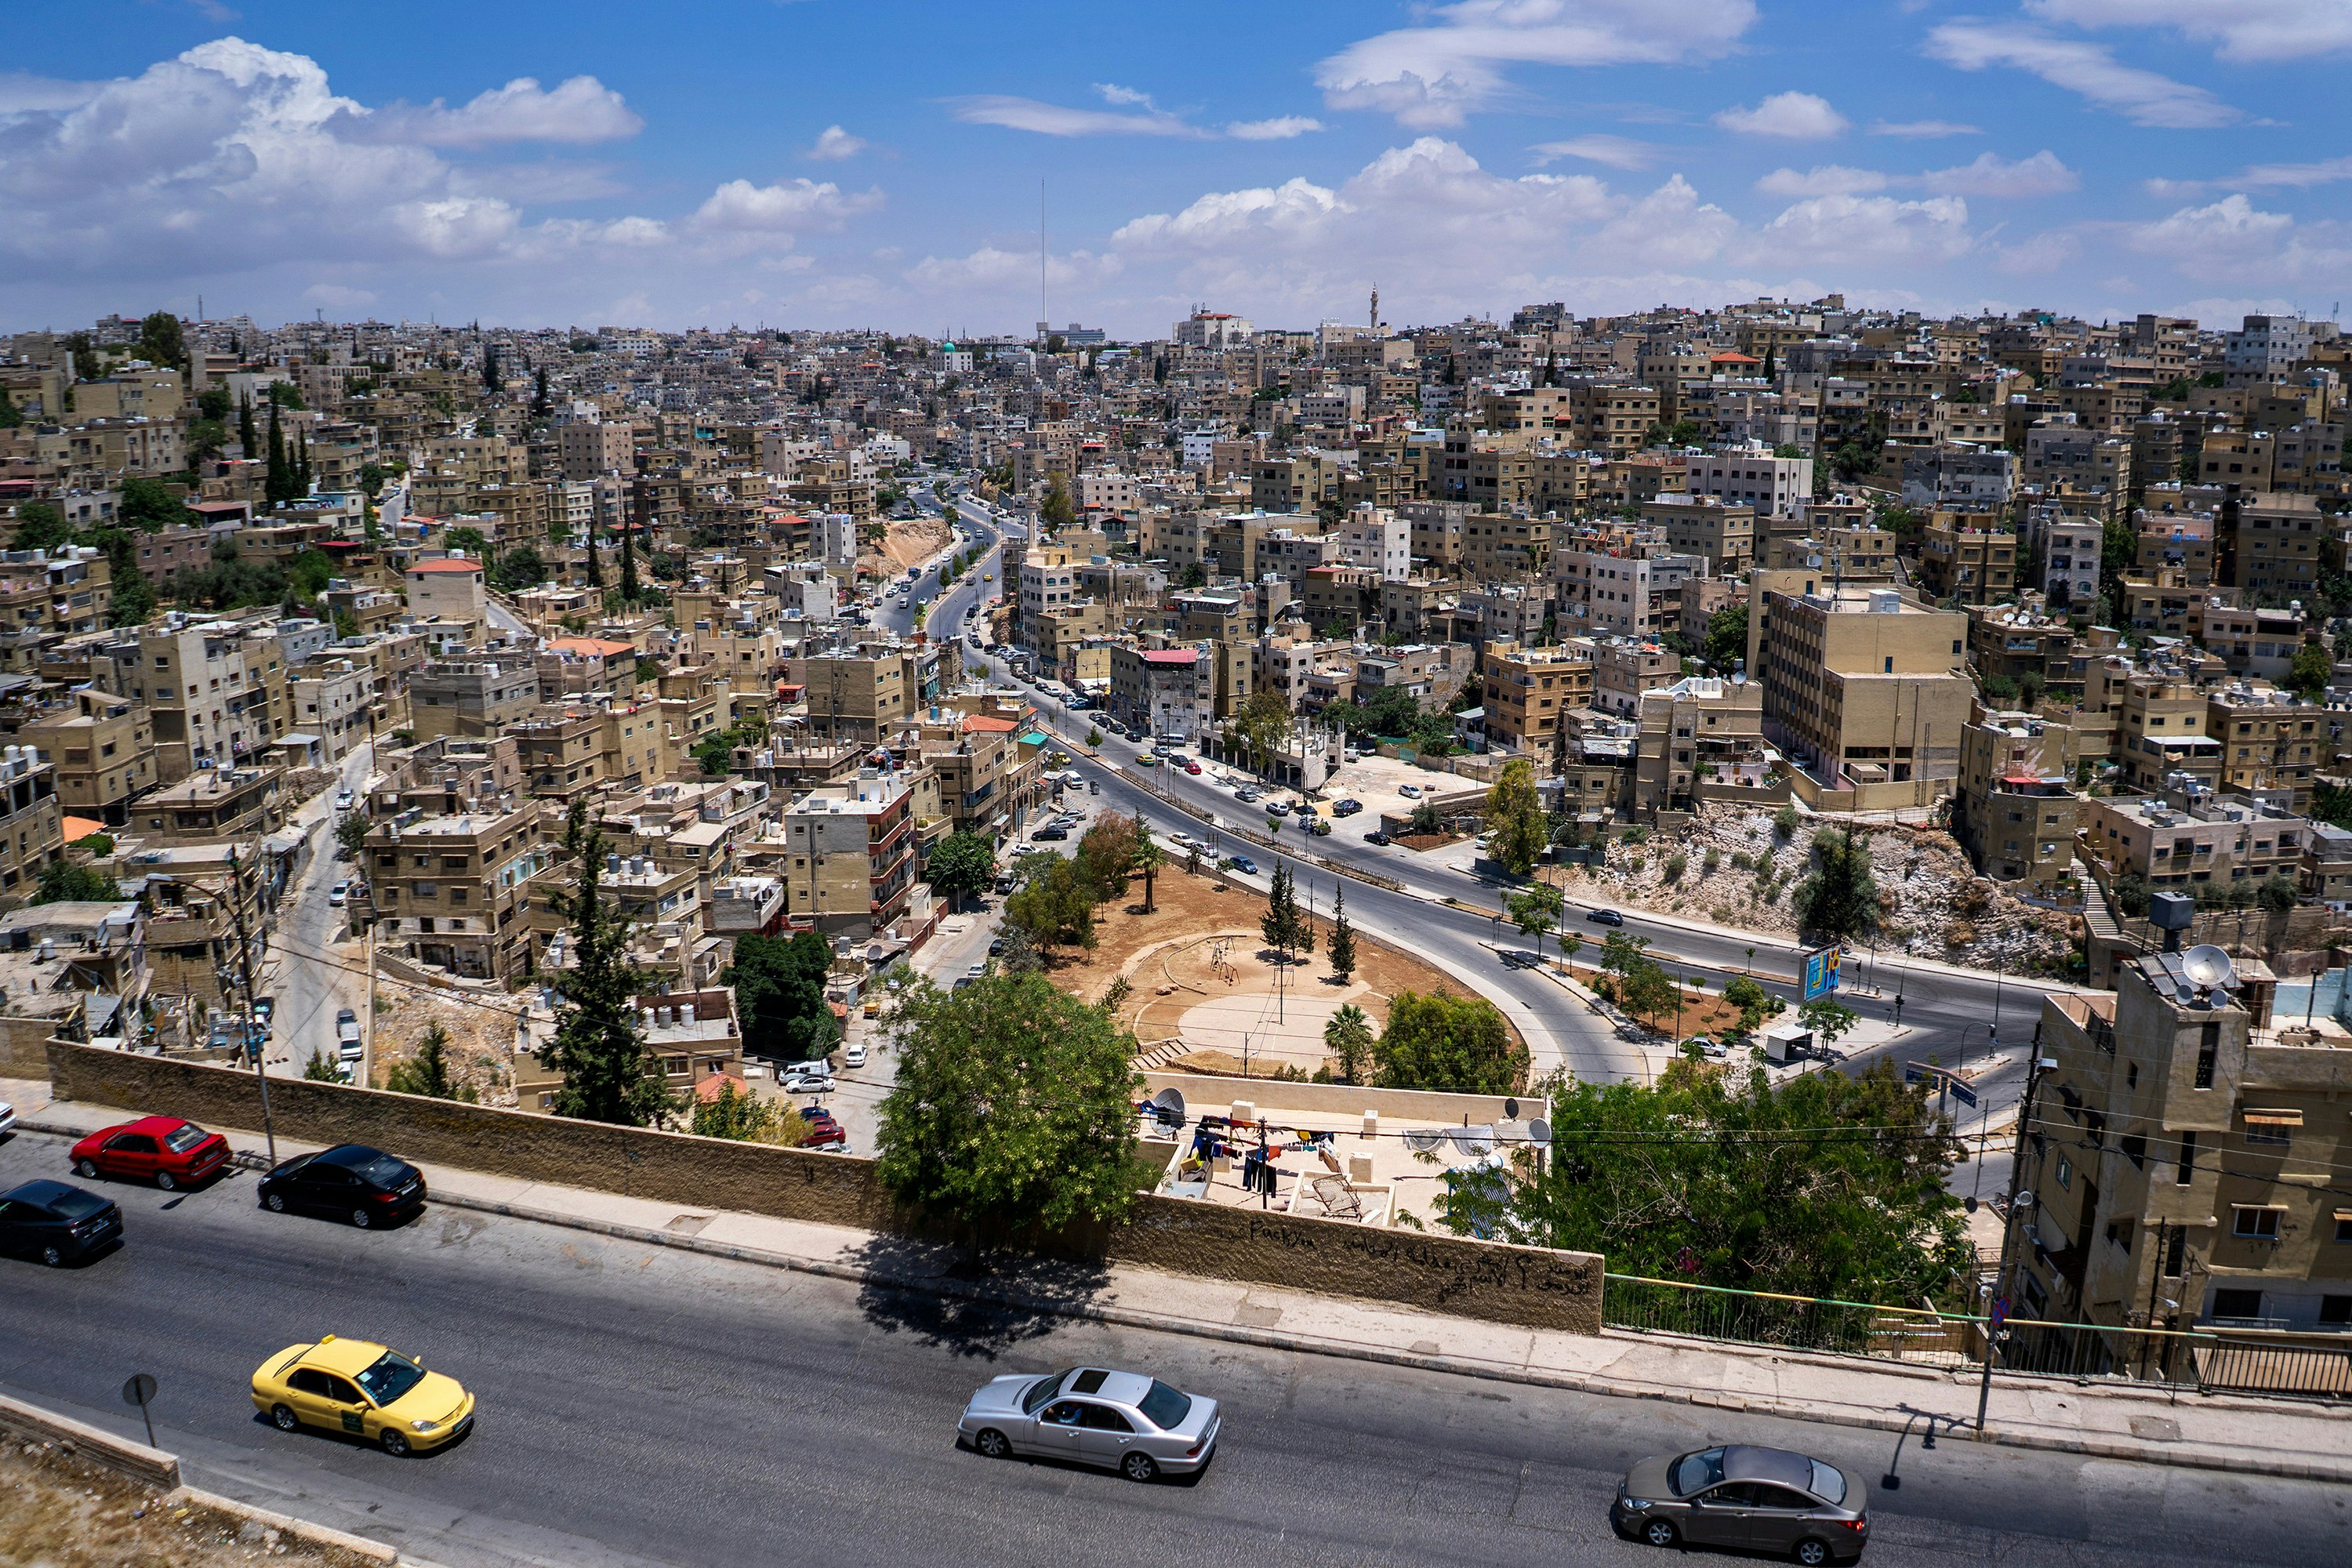 A view from above the city of Amman, Jordan.